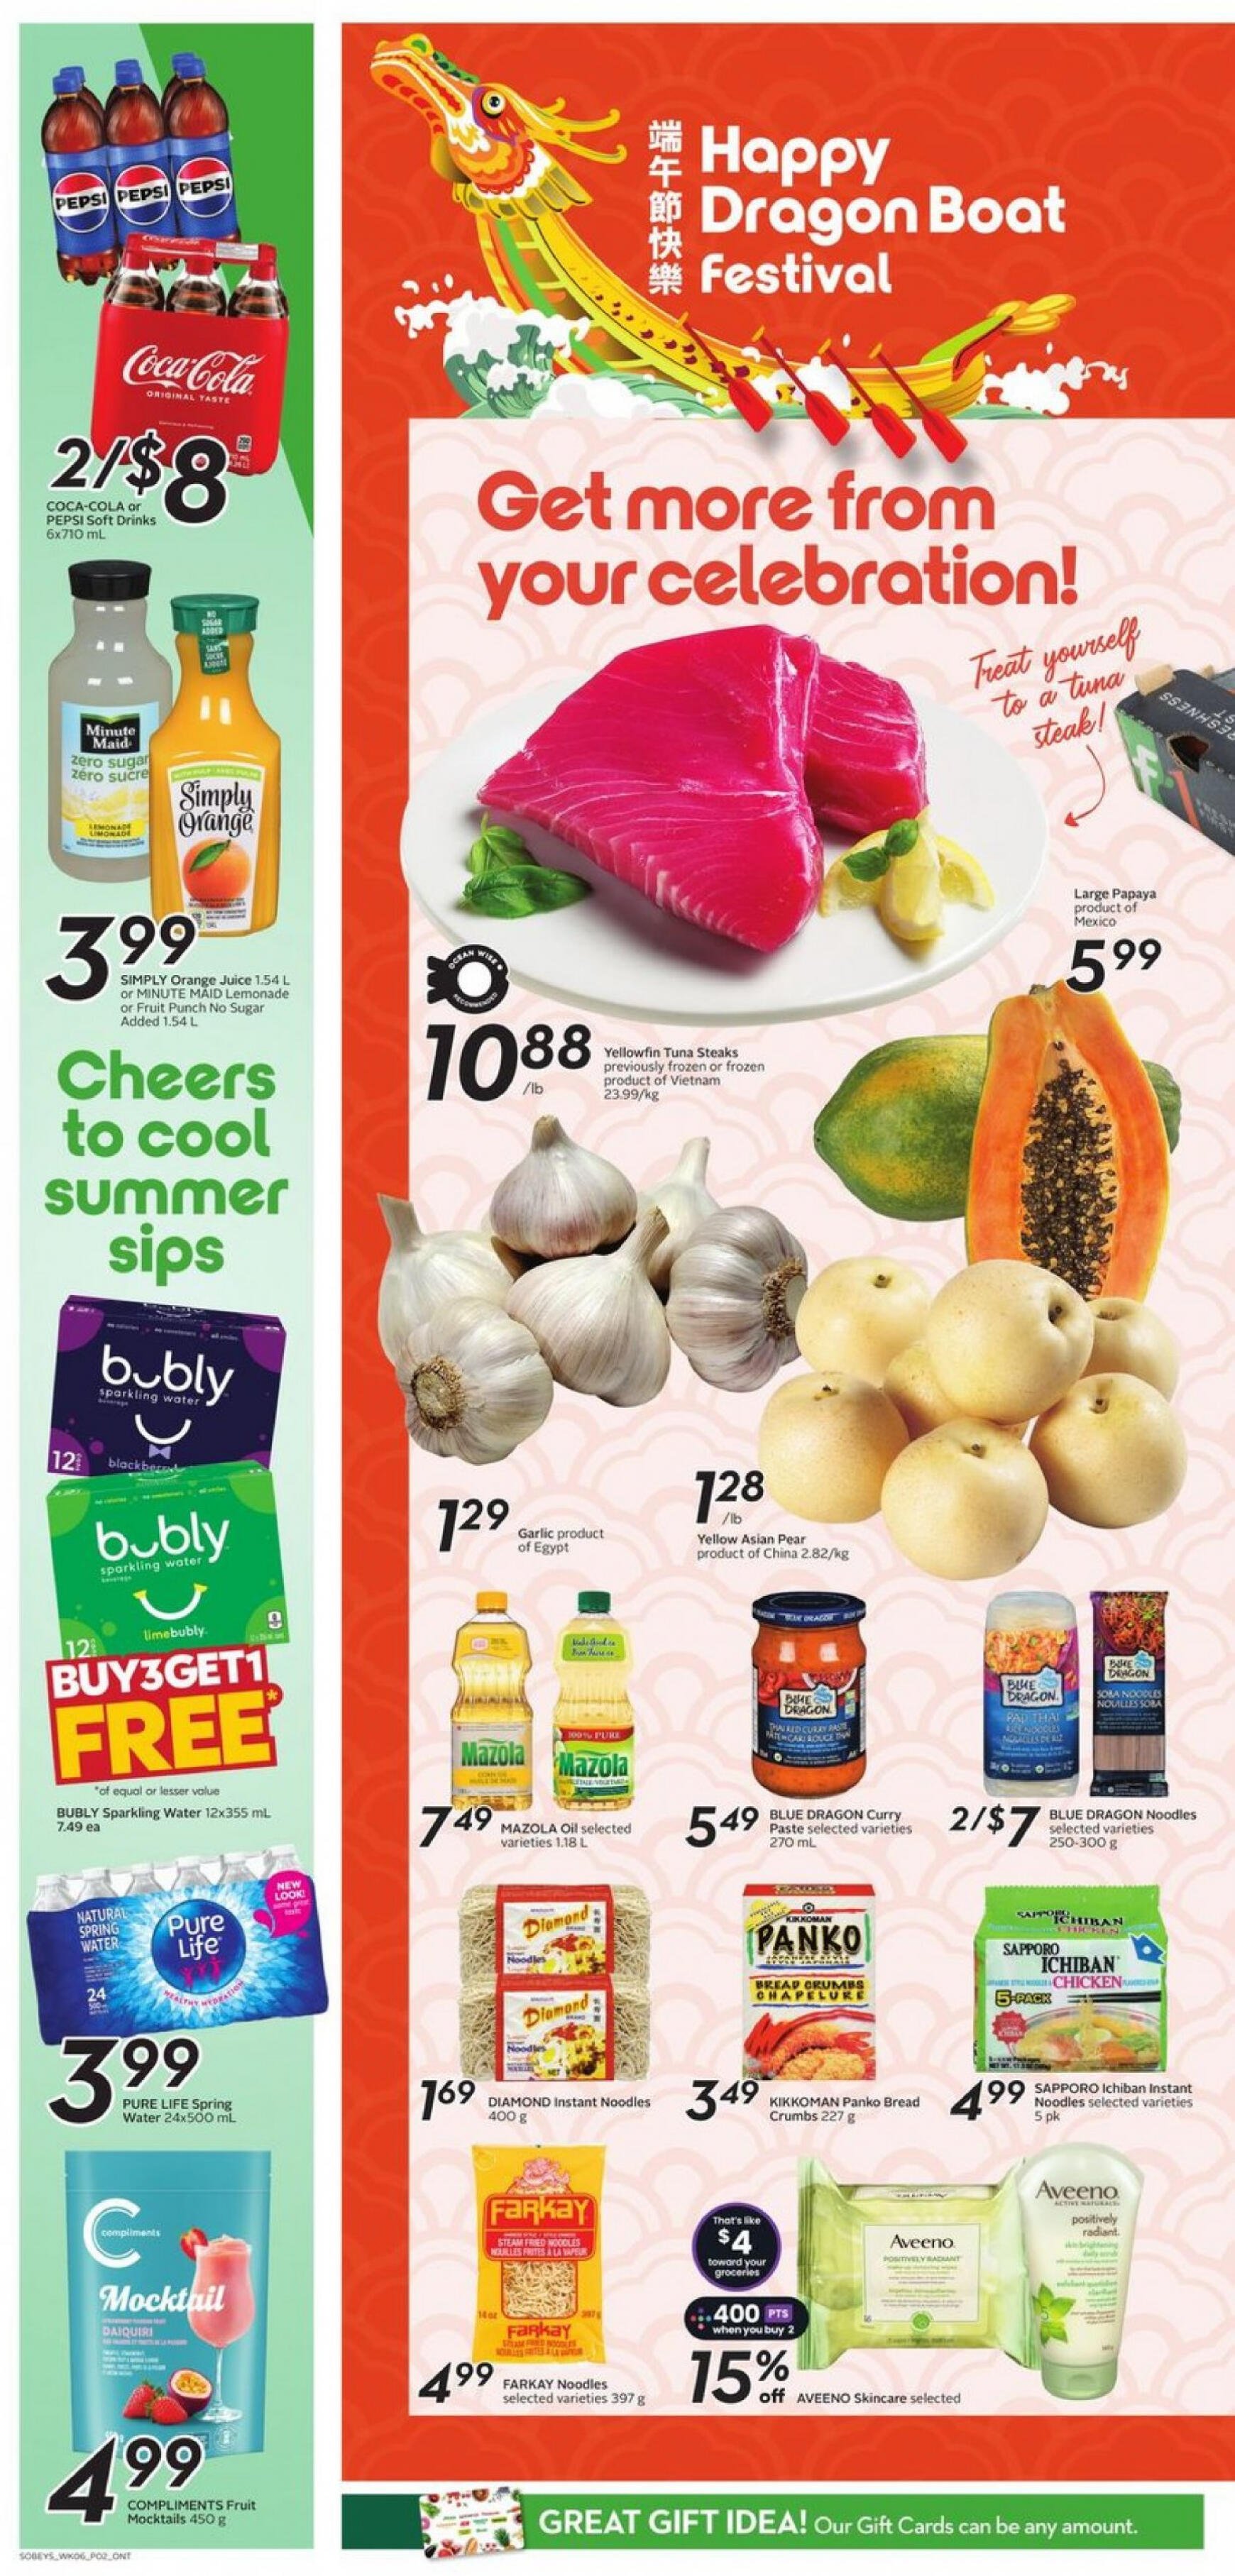 sobeys - Sobeys - Weekly Flyer - Ontario flyer current 06.06. - 12.06. - page: 6